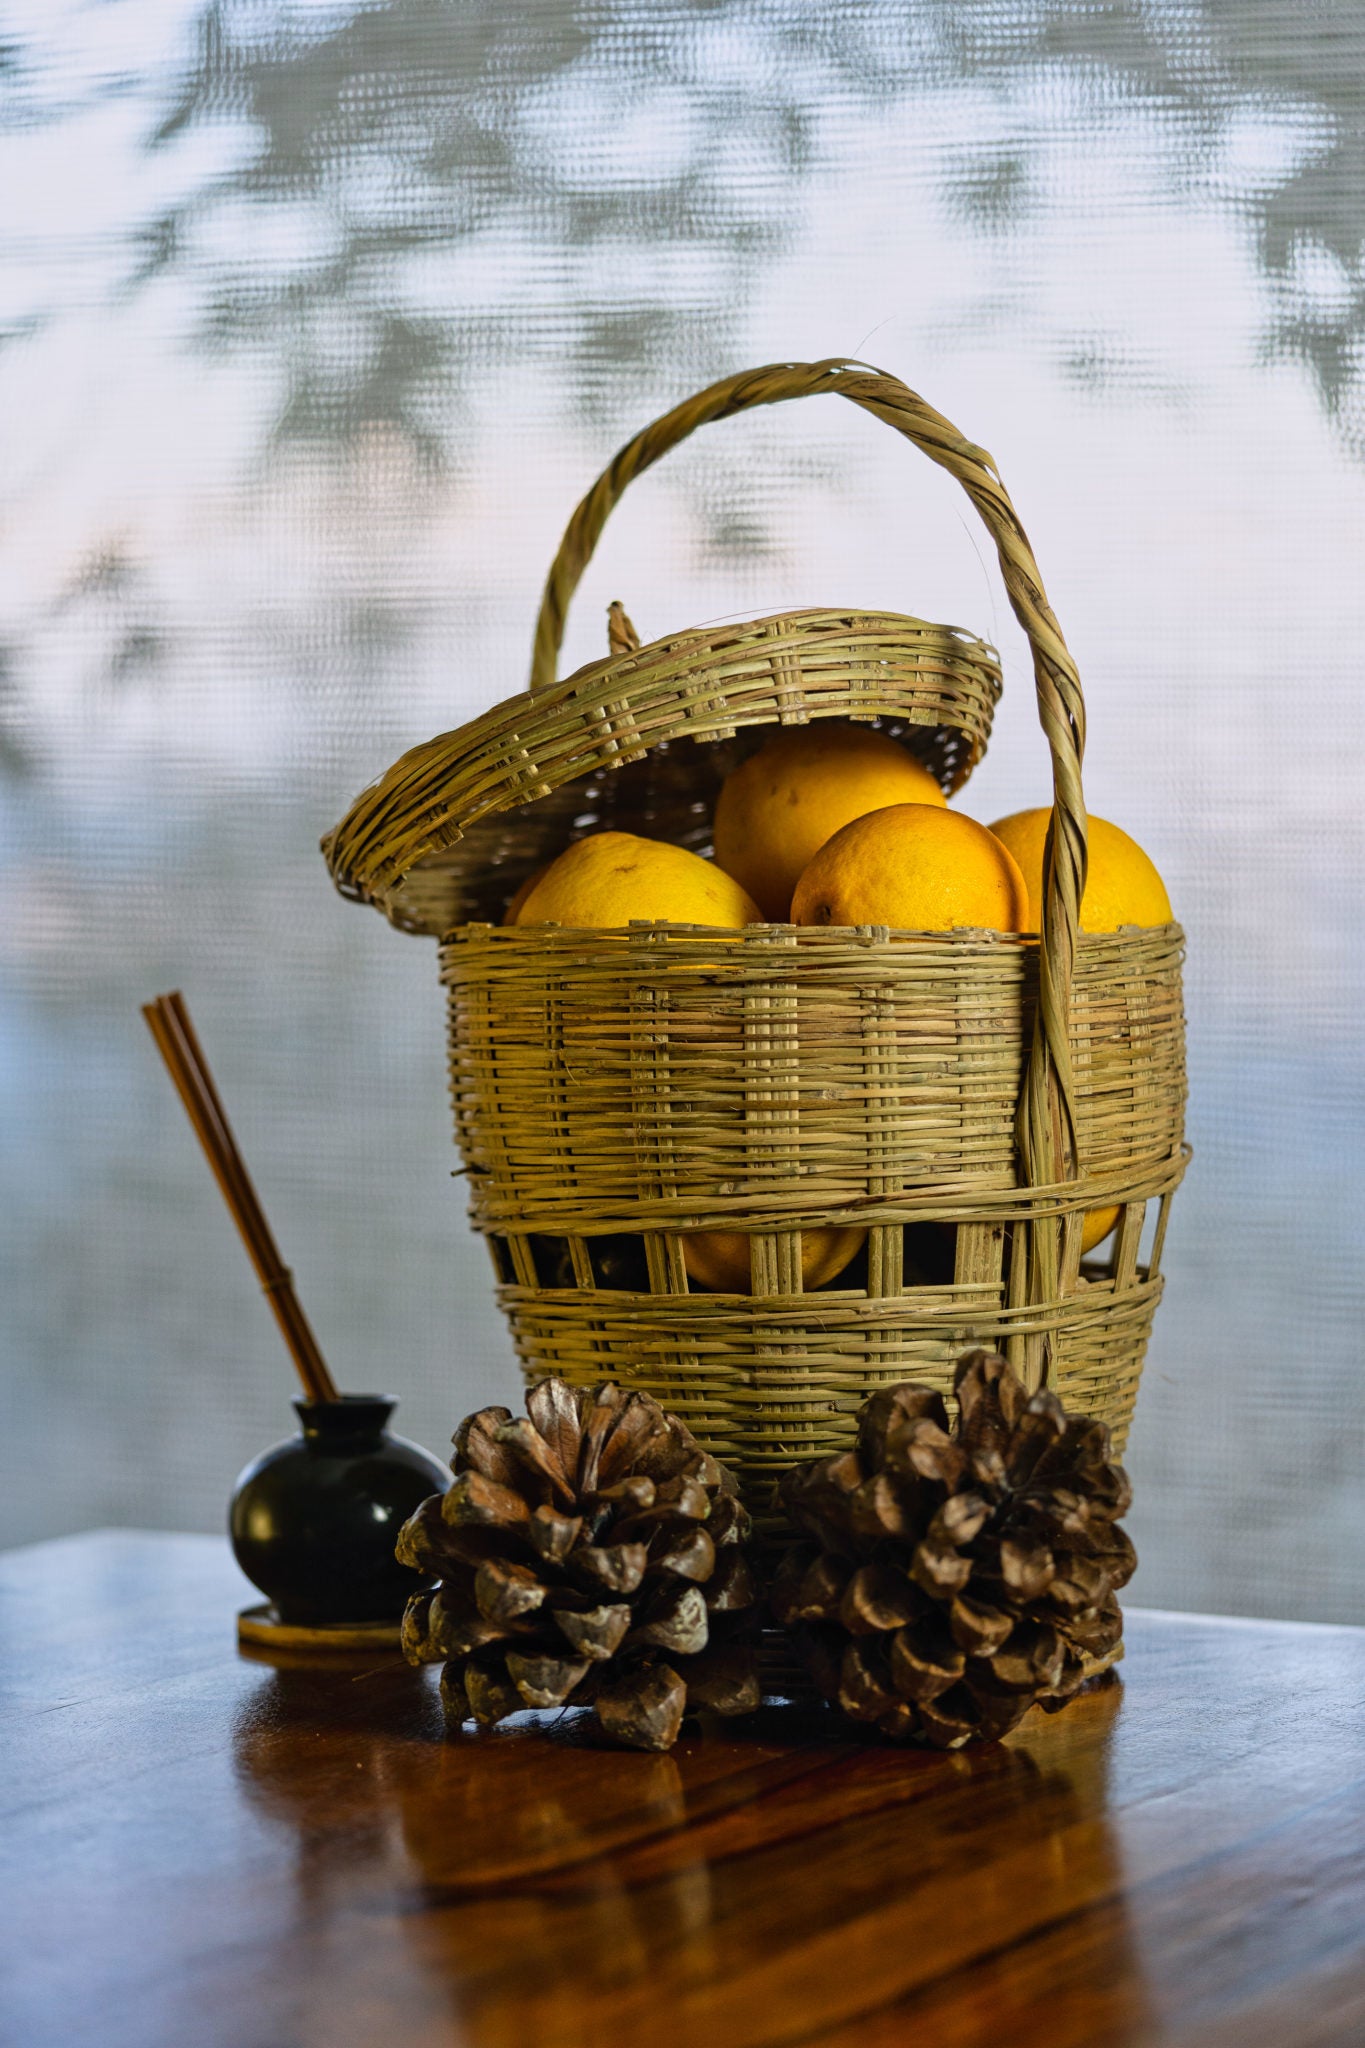 Shopping basket for veggies with lid and handle, containing lemons on a table